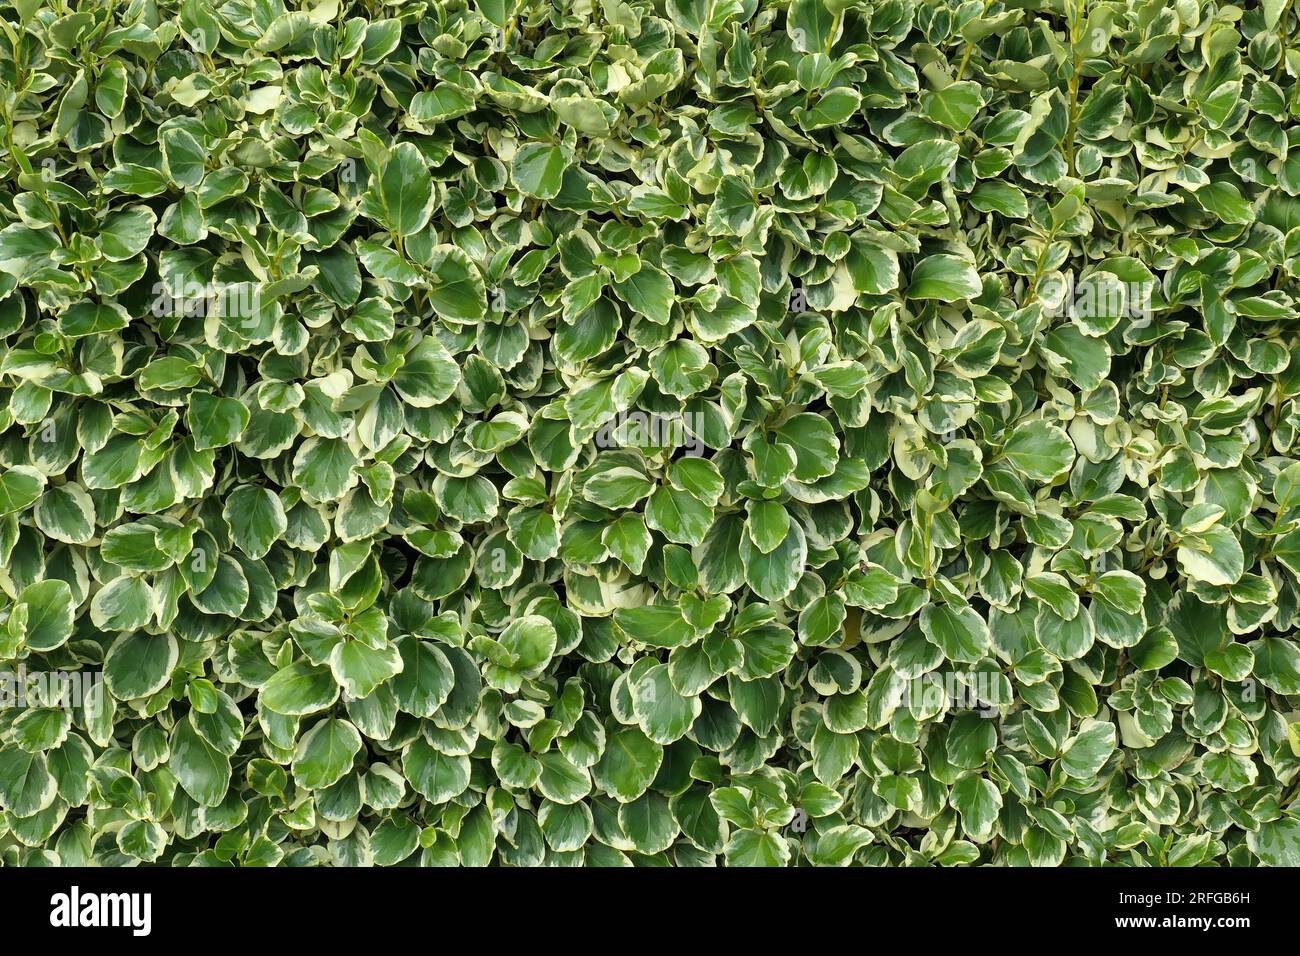 Closeup of the cream white green variegated leaves of the perennial evergreen garden shrub Griselinia littoralis Variegata filling the frame. Stock Photo